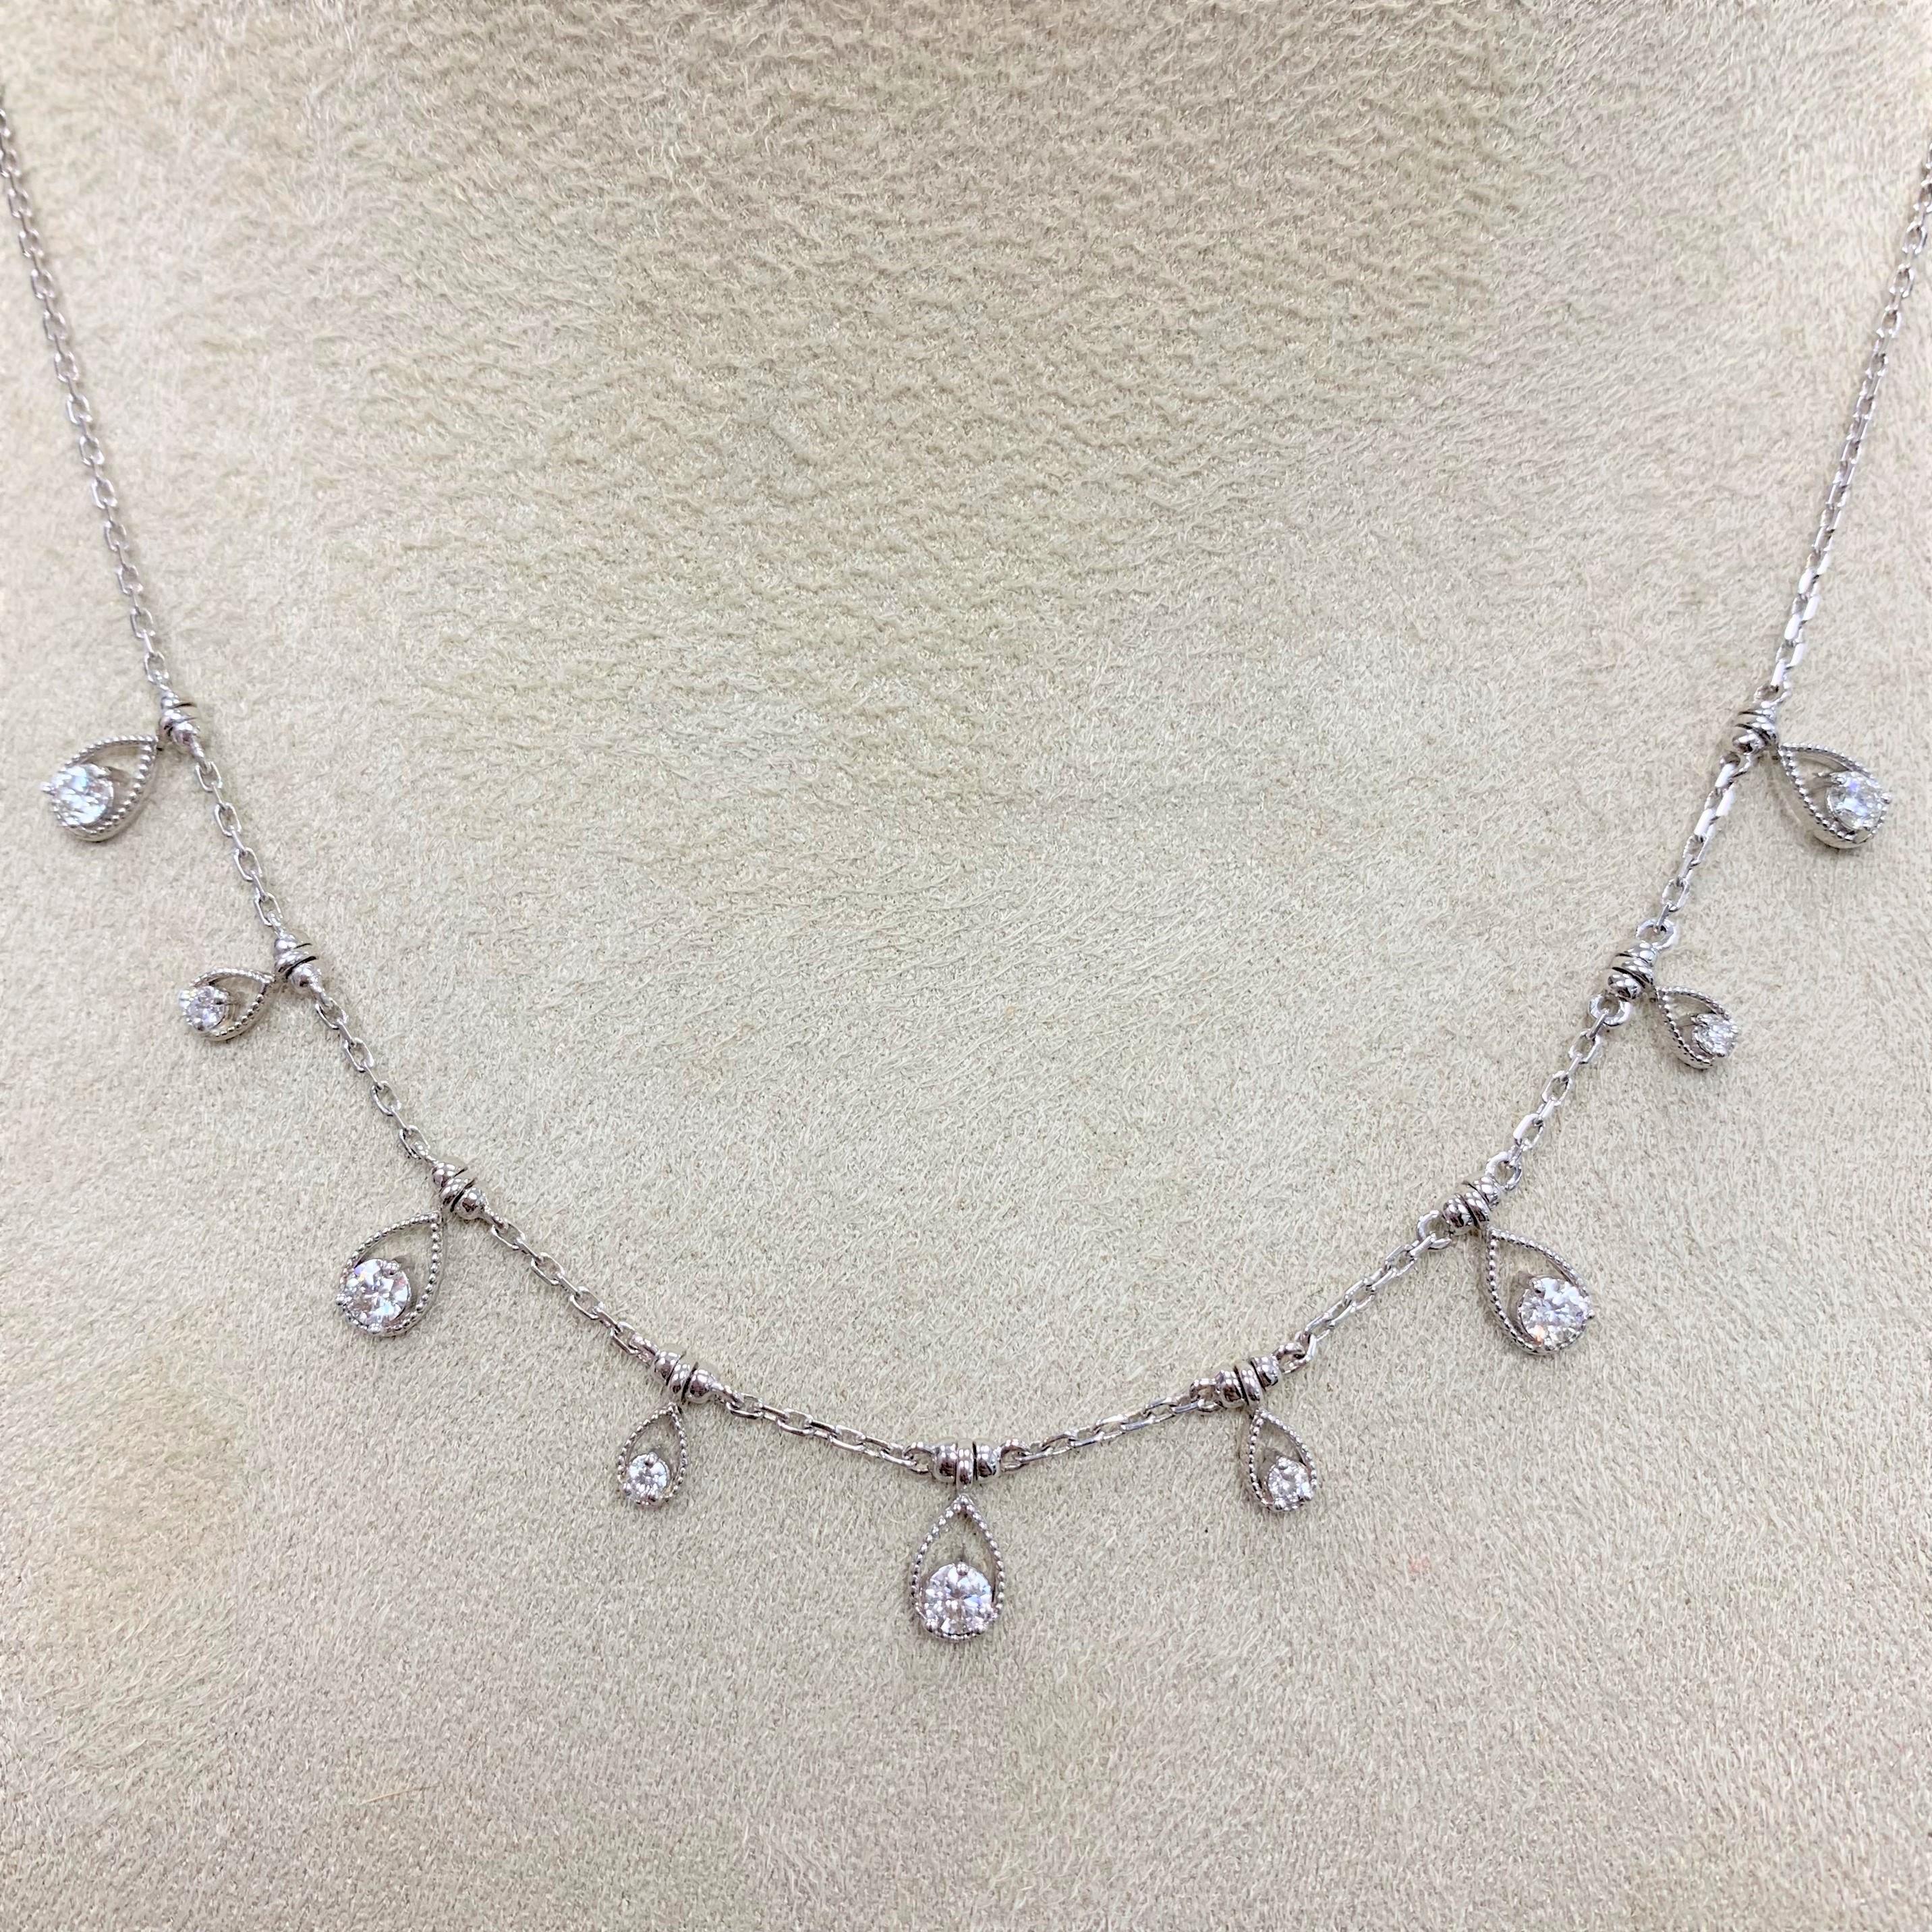 Fun & Chic this necklace is full of life and character. It is great of daily stylish wear or an evening out. In can also be layered with similar styles in Rose & Yellow Gold.

Total Diamond Weight: 0.61 ct 
No. of Diamonds: 9
Diamond Color: G -